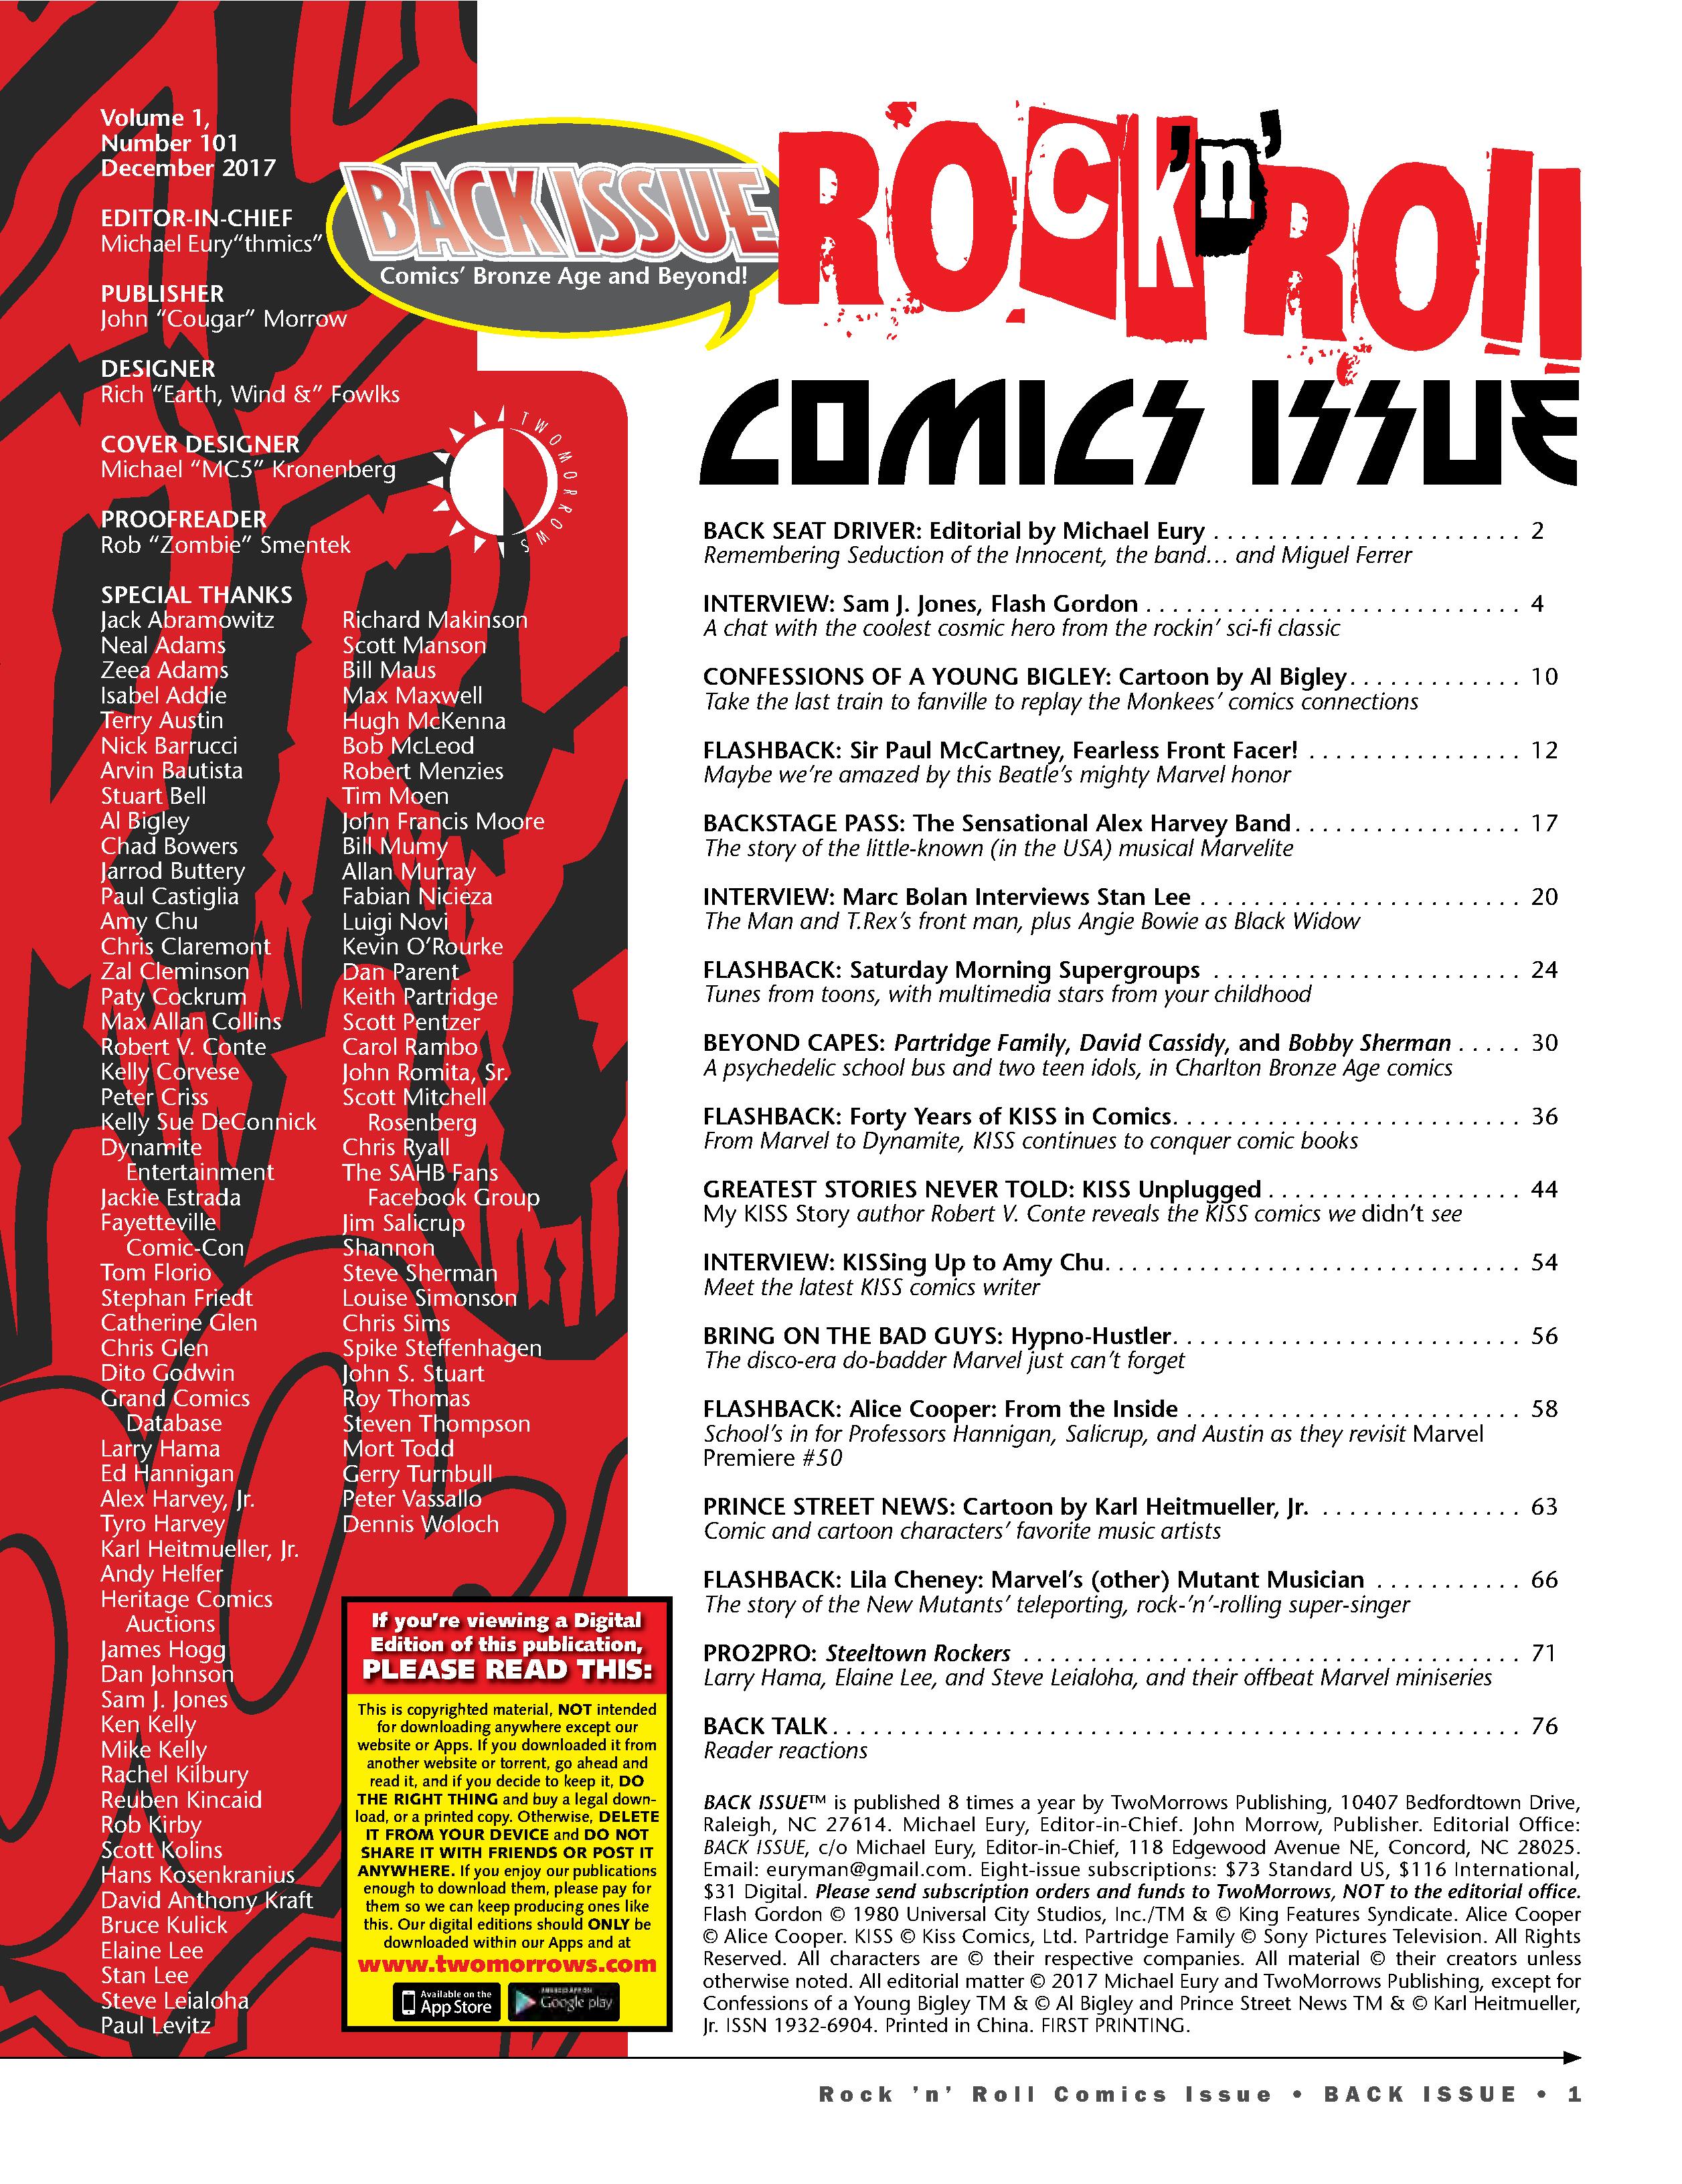 Read online Back Issue comic -  Issue #101 - 3